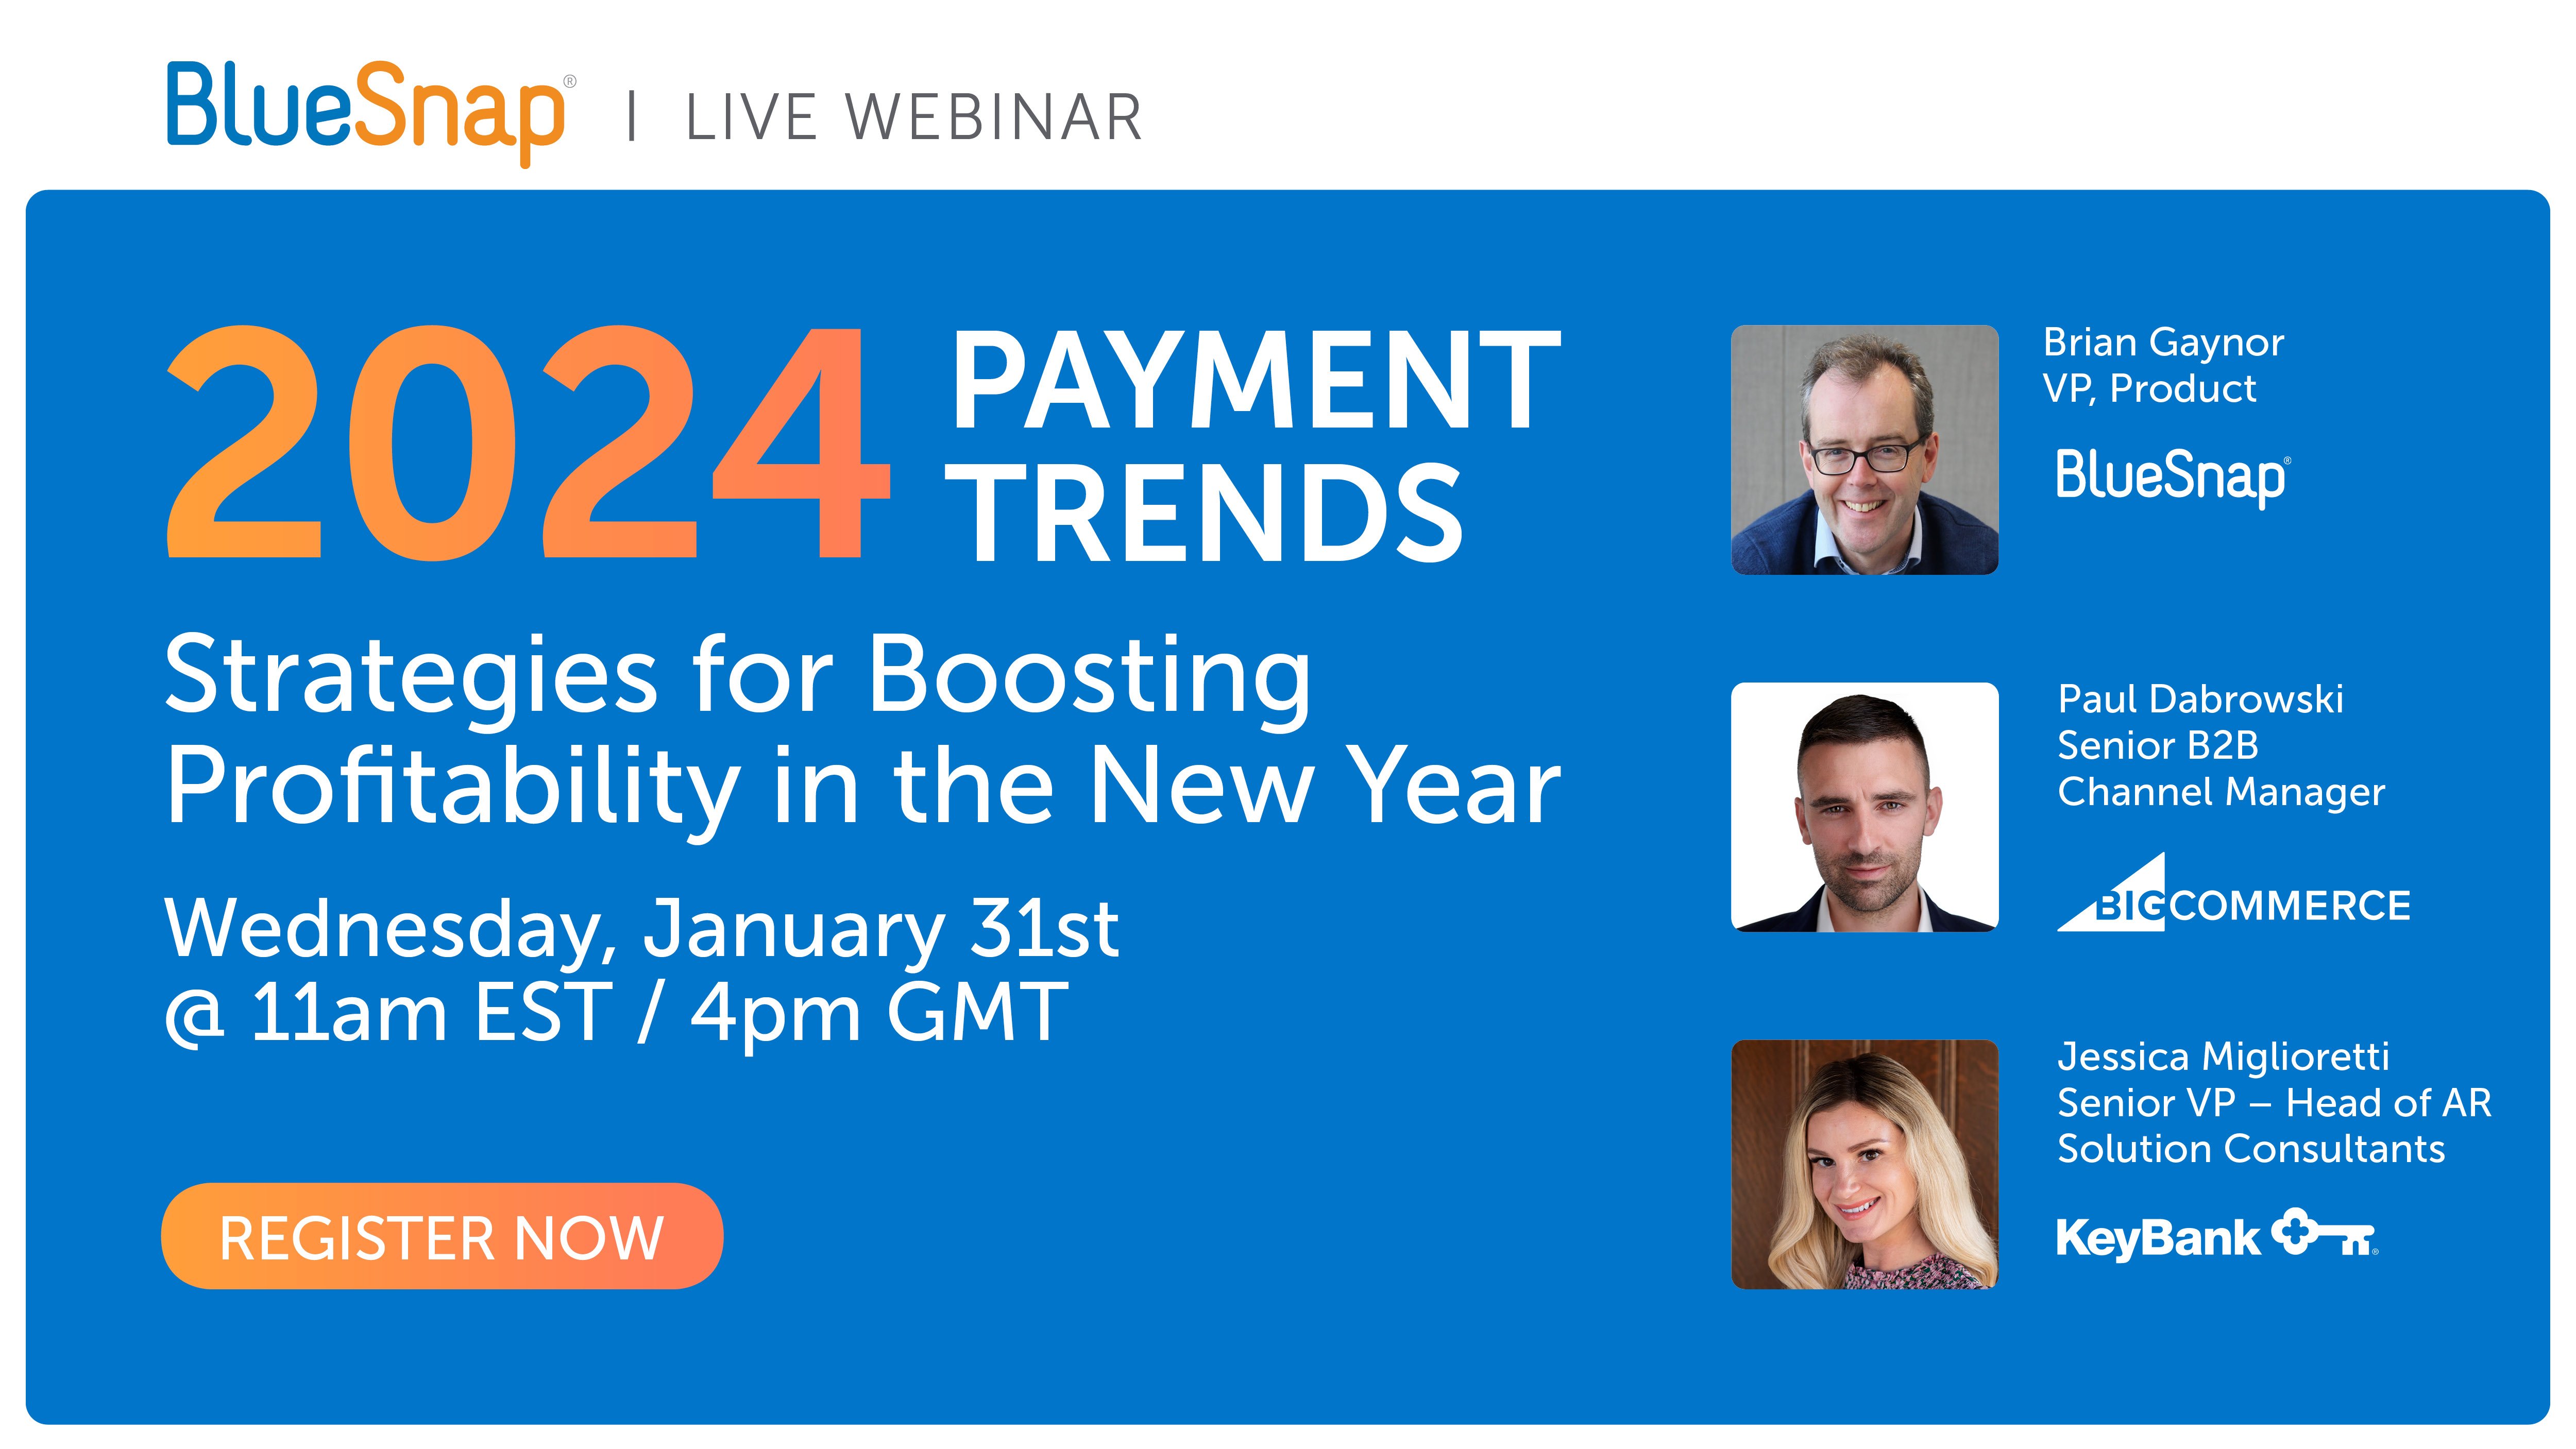 2024 Payment Trends Webinar Strategies for Boosting Profitability in